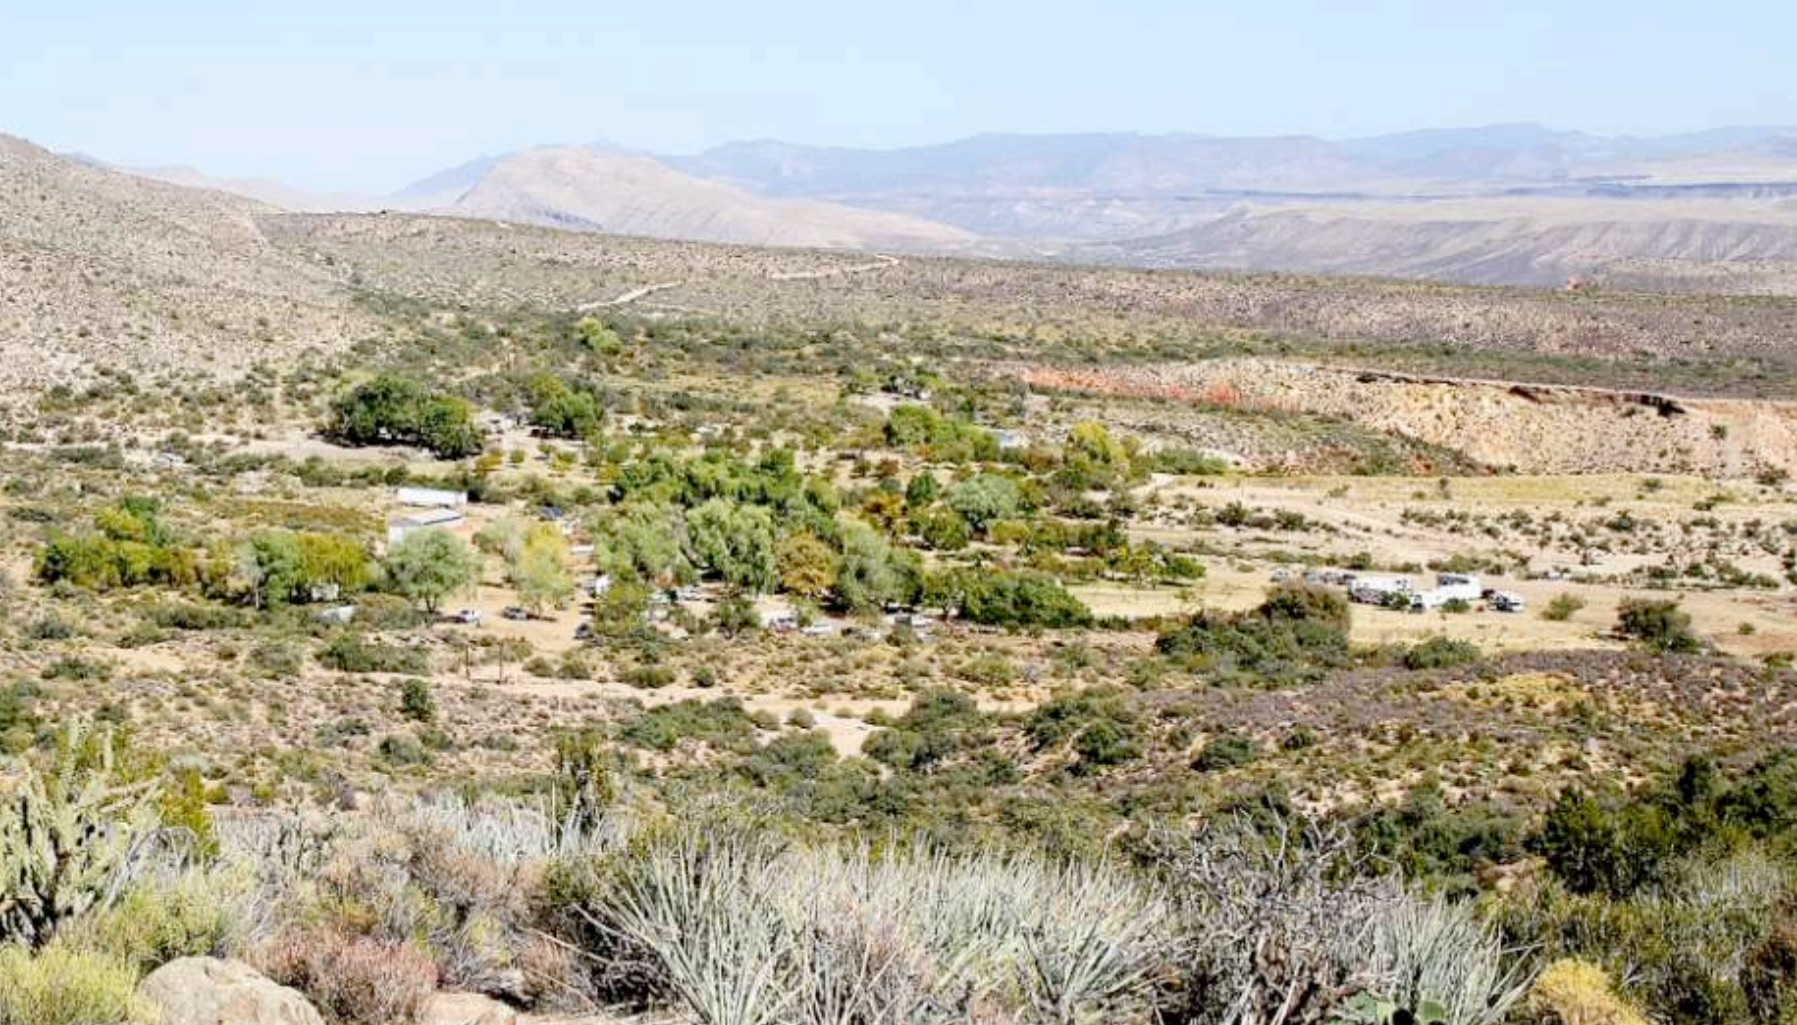 Aravada Springs property and surrounding area